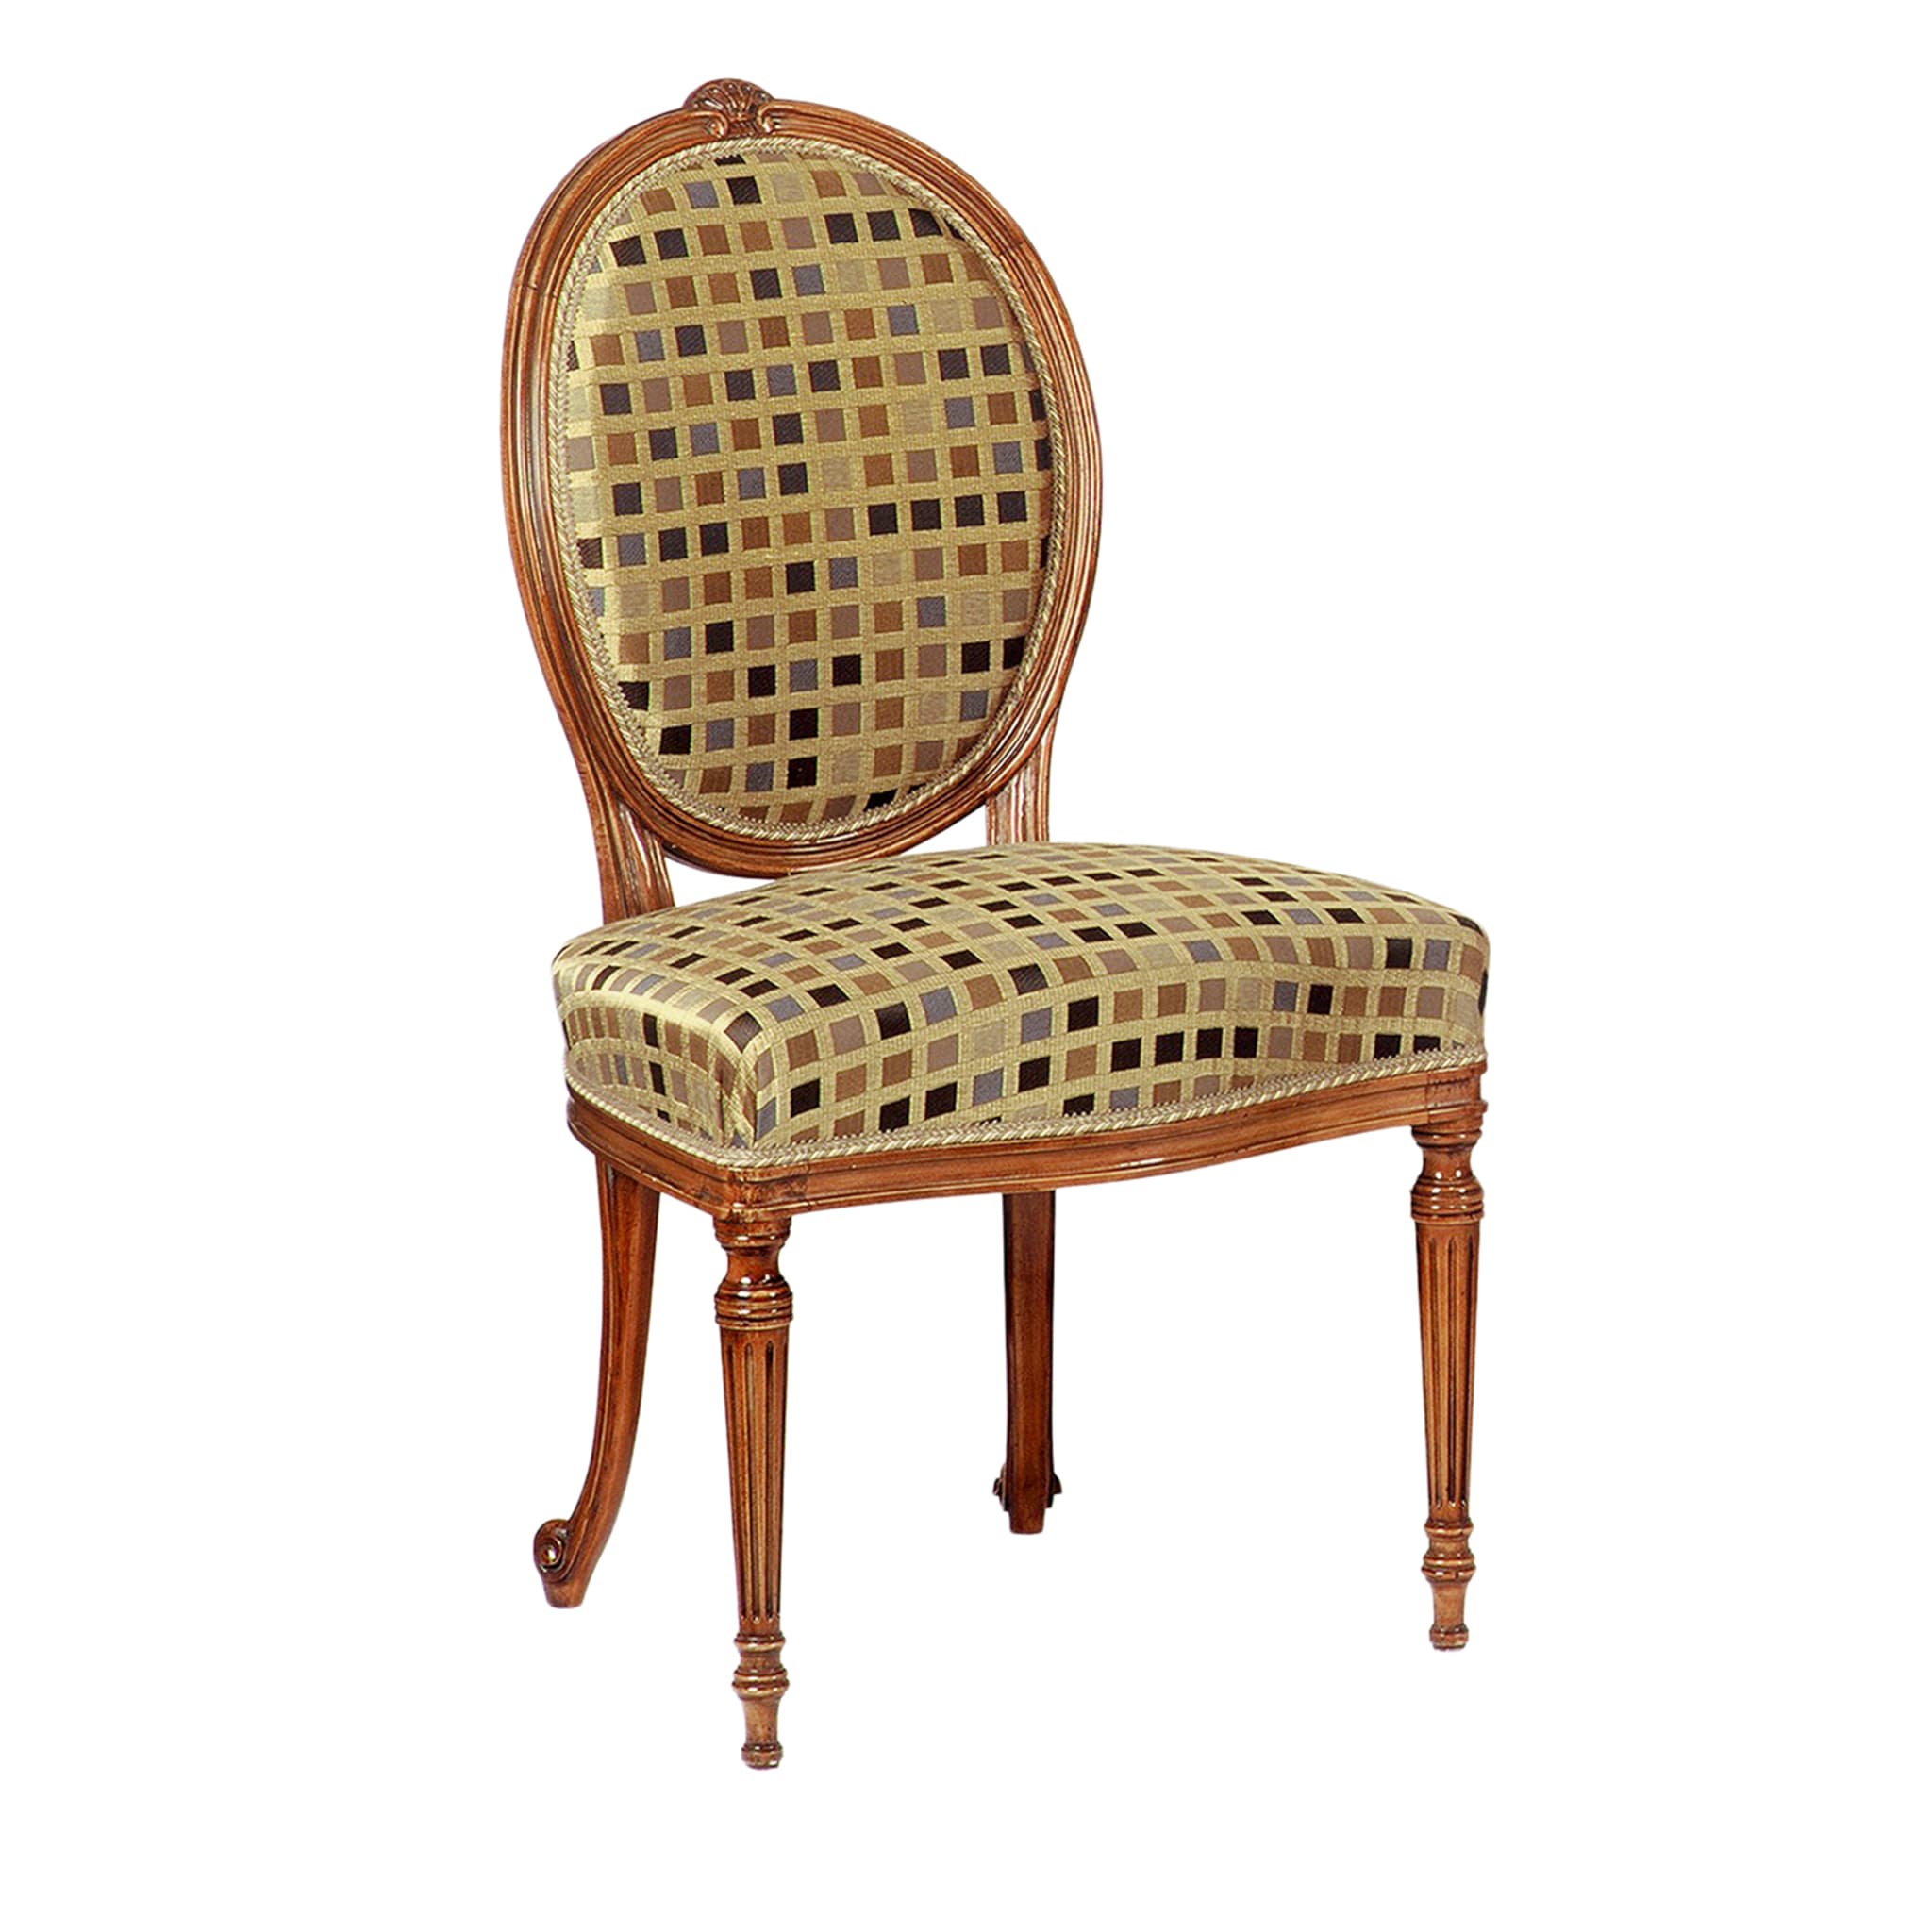 King George III-Style Patterned Polychrome Chair - Main view